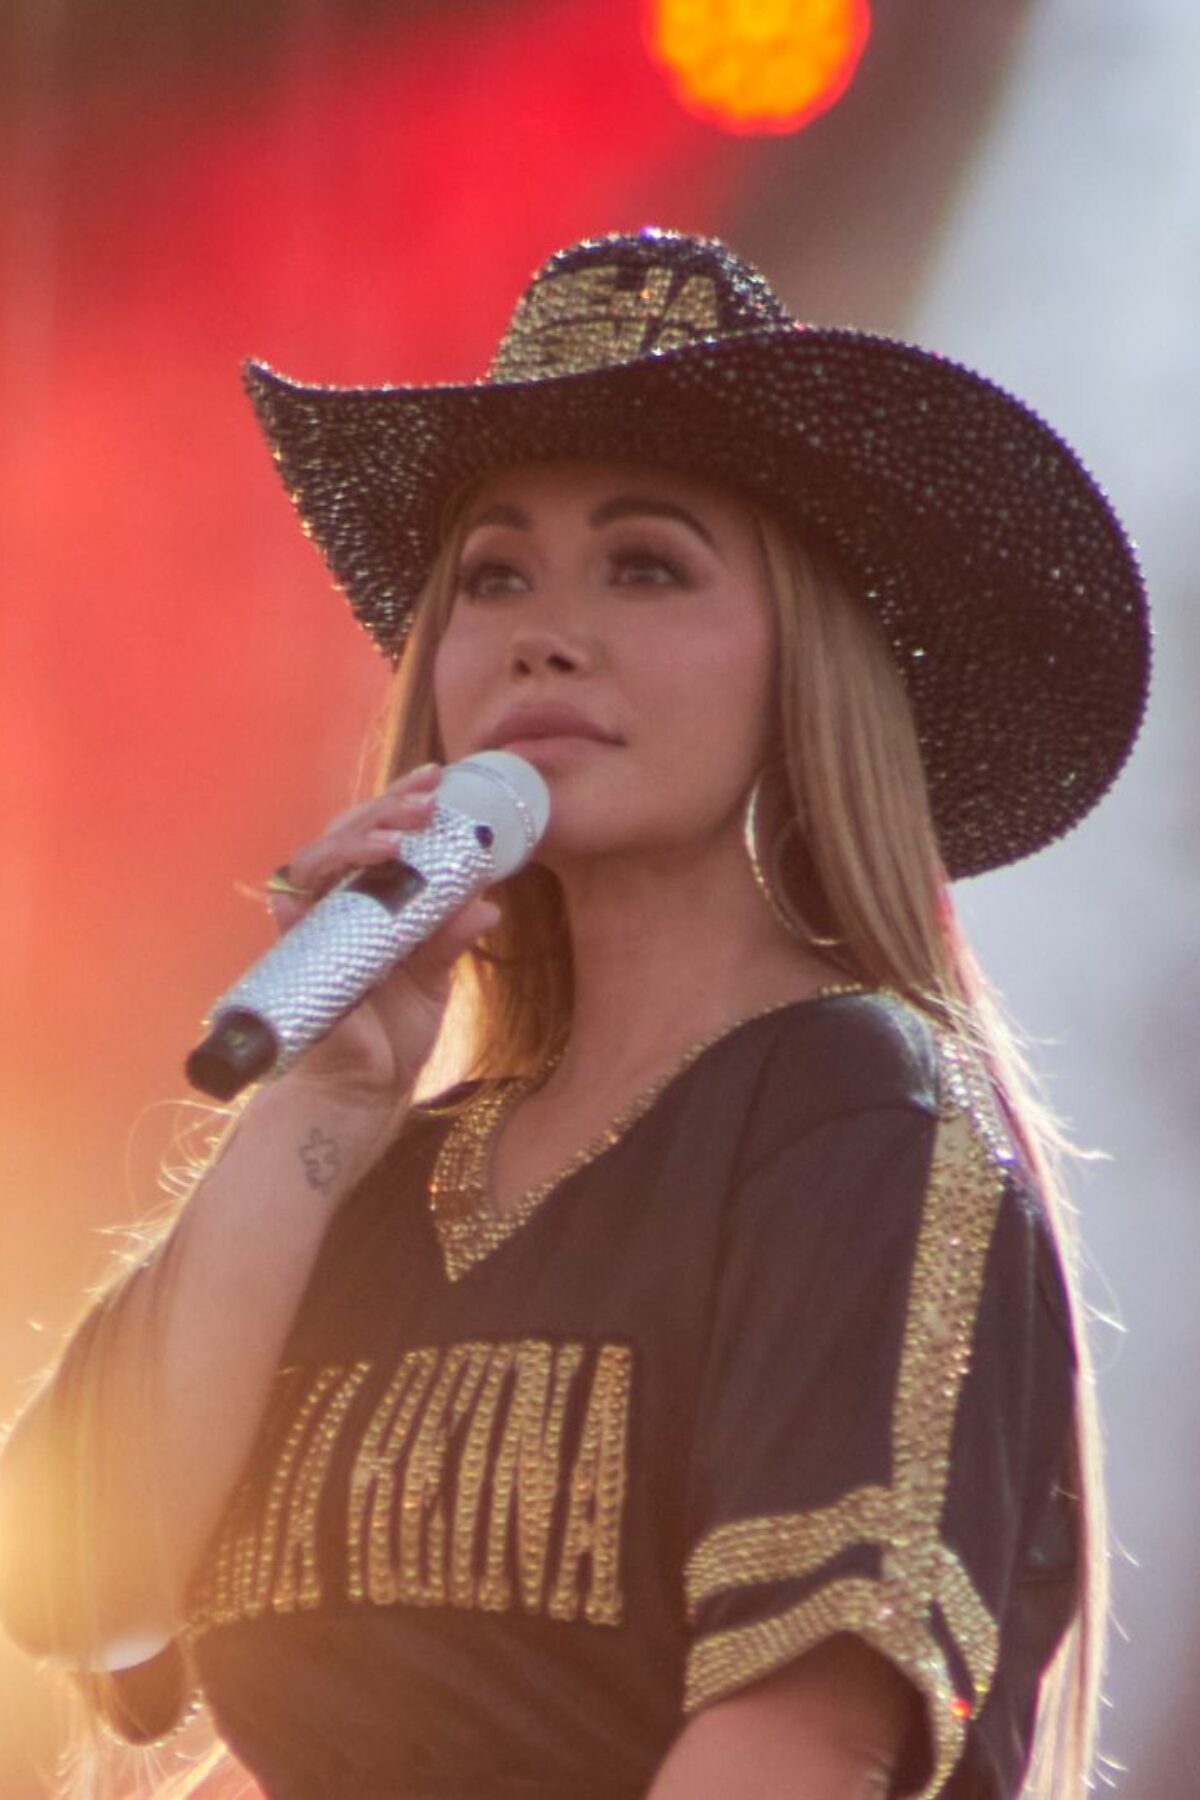 MEXICO CITY, MEXICO - SEPTEMBER 9: singer Chiquis performs during the ARRE Fest 2023 at Foro Sol on September 9, 2023 in Mexico City, Mexico. (Photo by Jaime Nogales/Medios y Media/Getty Images)